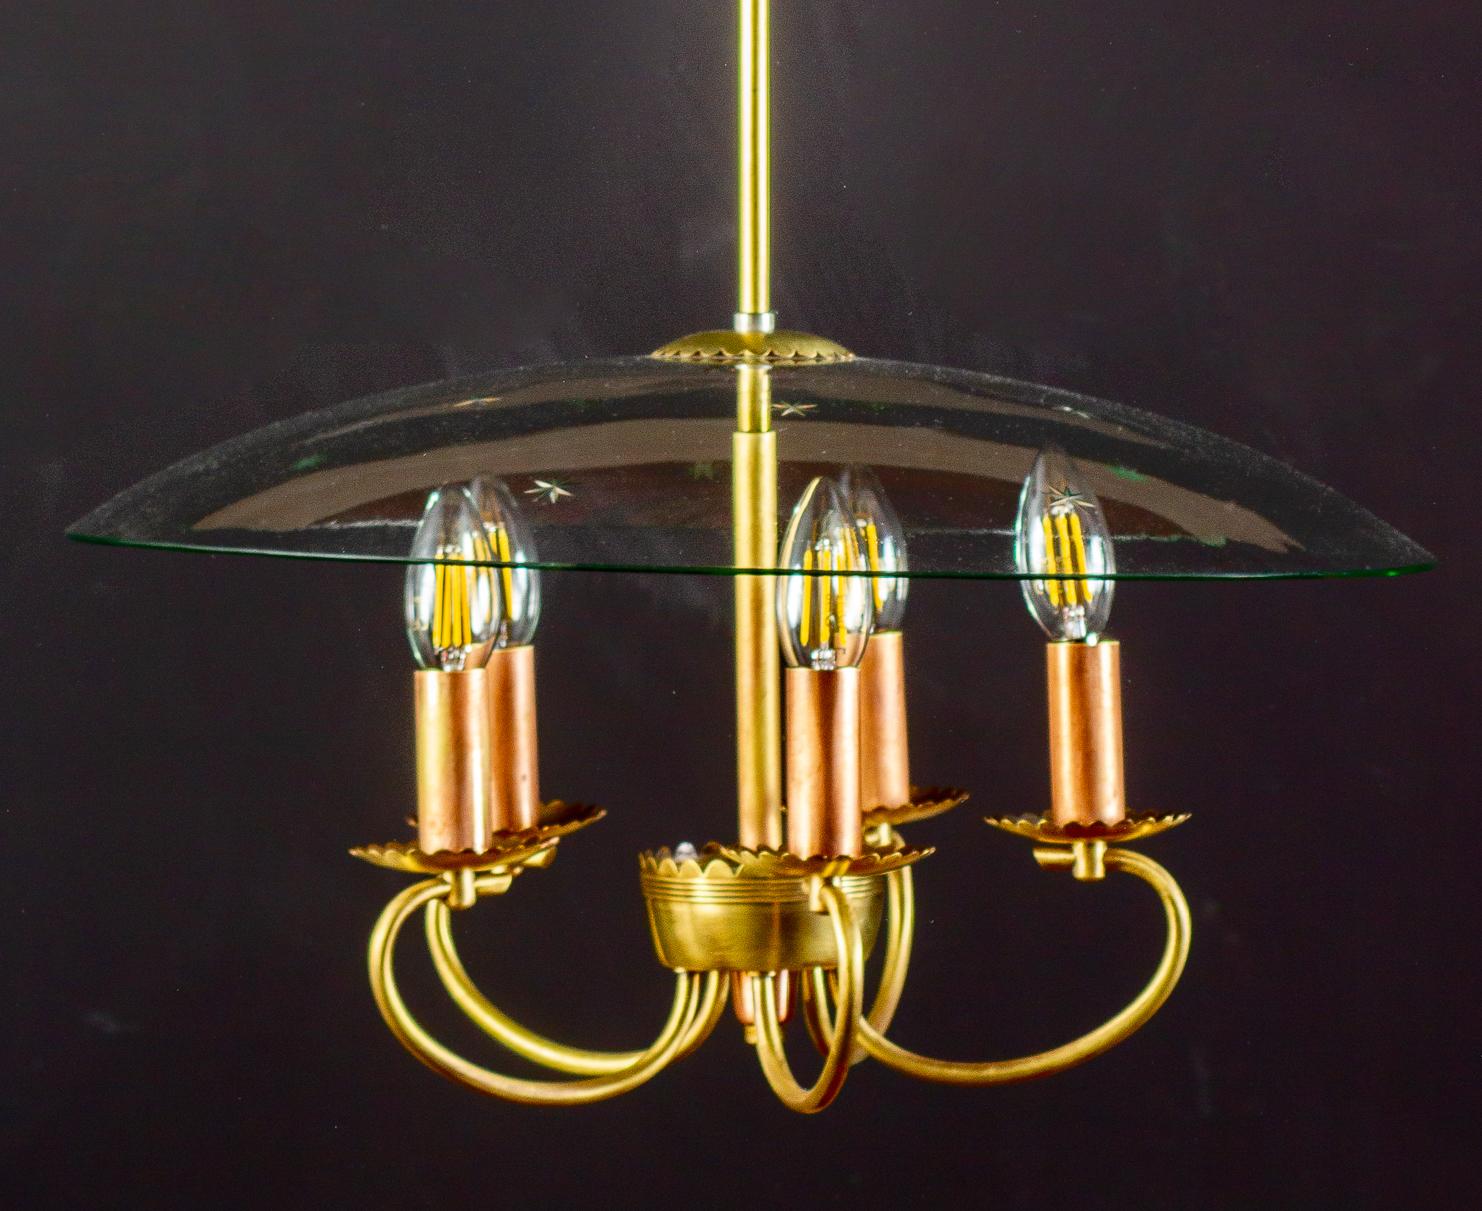 Delicious Art Deco chandelier with scrolled brass terminating in five scallop edged flower form socket cups, supported by finely etched glass. Attributed to Pietro Chiesa style for Fontana Arte.
Excellent original vintage condition.
Length of drop